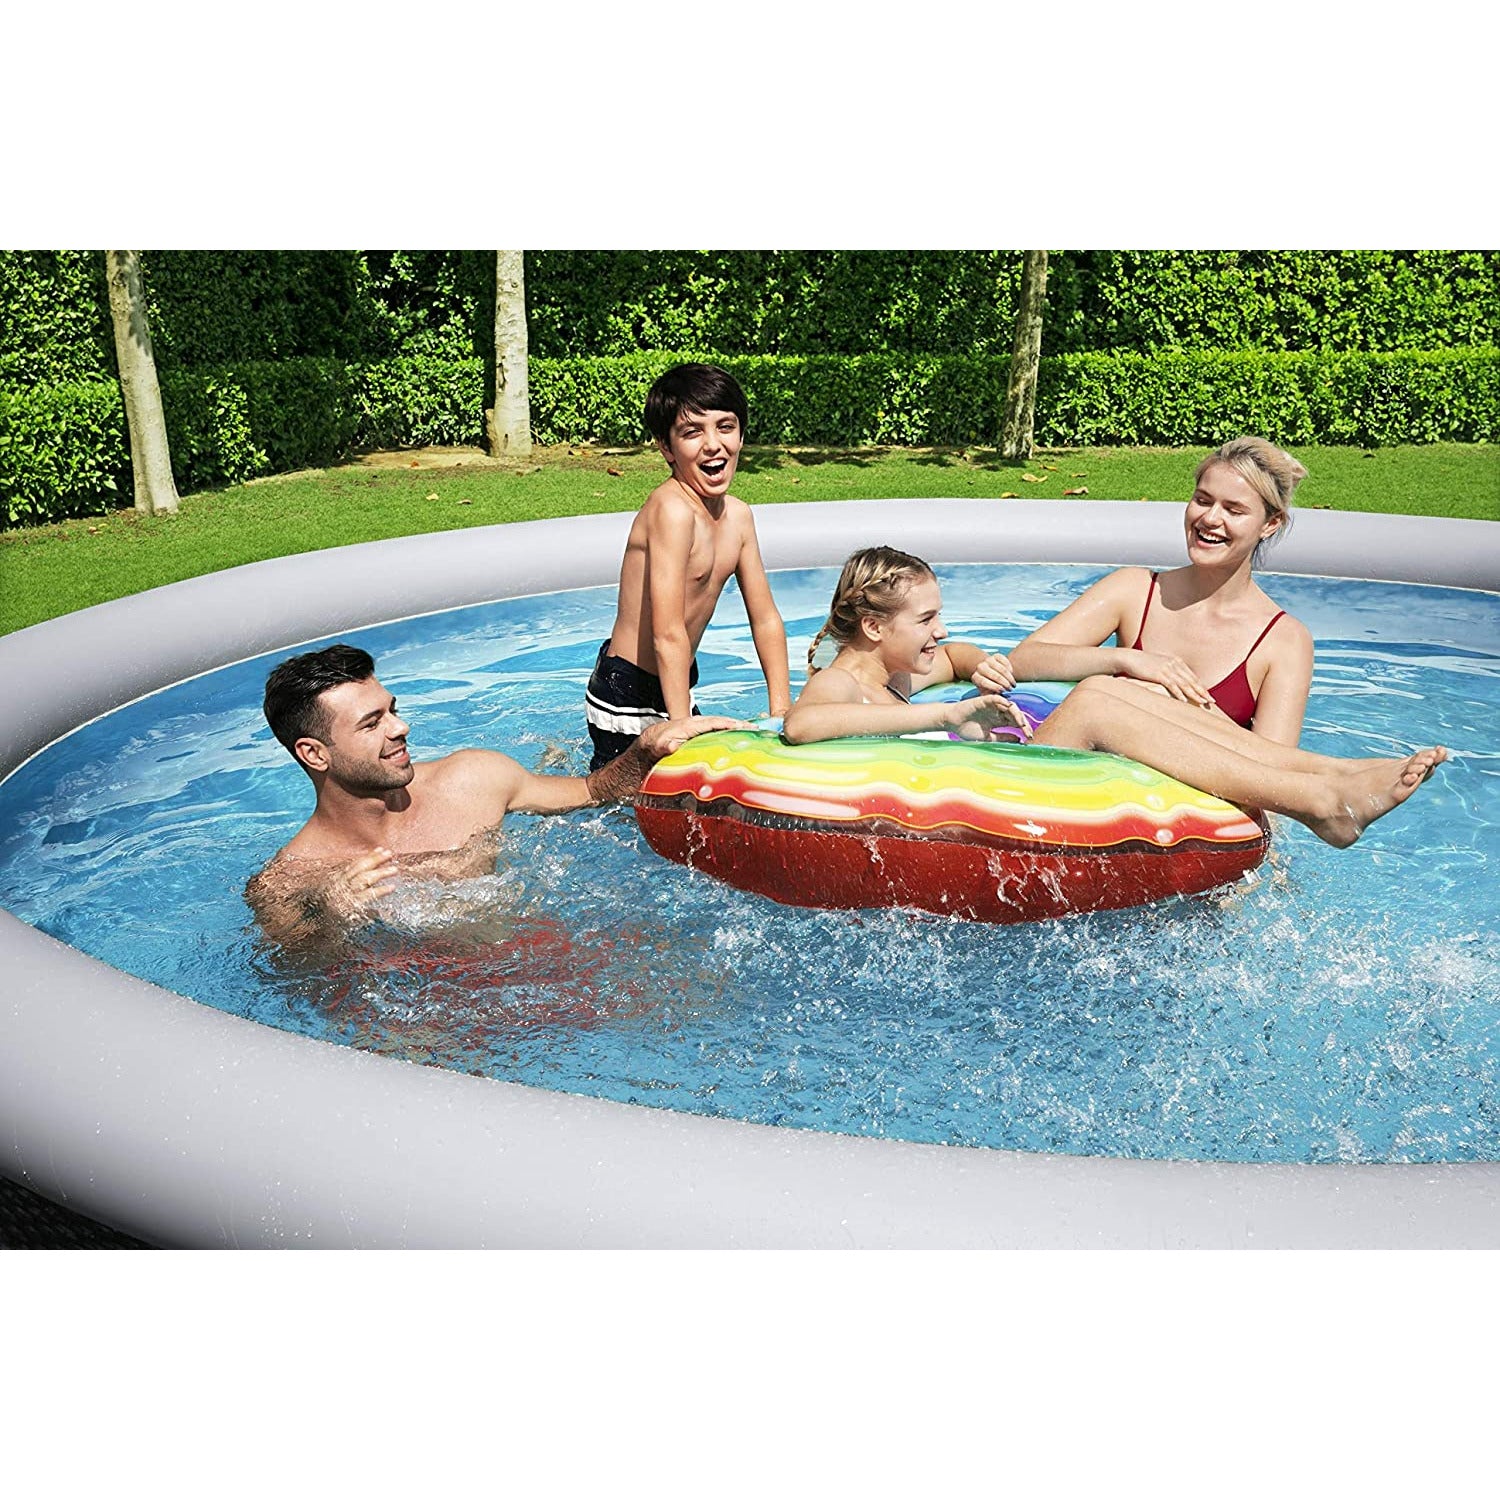 13ft x 33in Bestway 57375E Fast Round Inflatable Pool  | Rattan Print Above Ground Pool